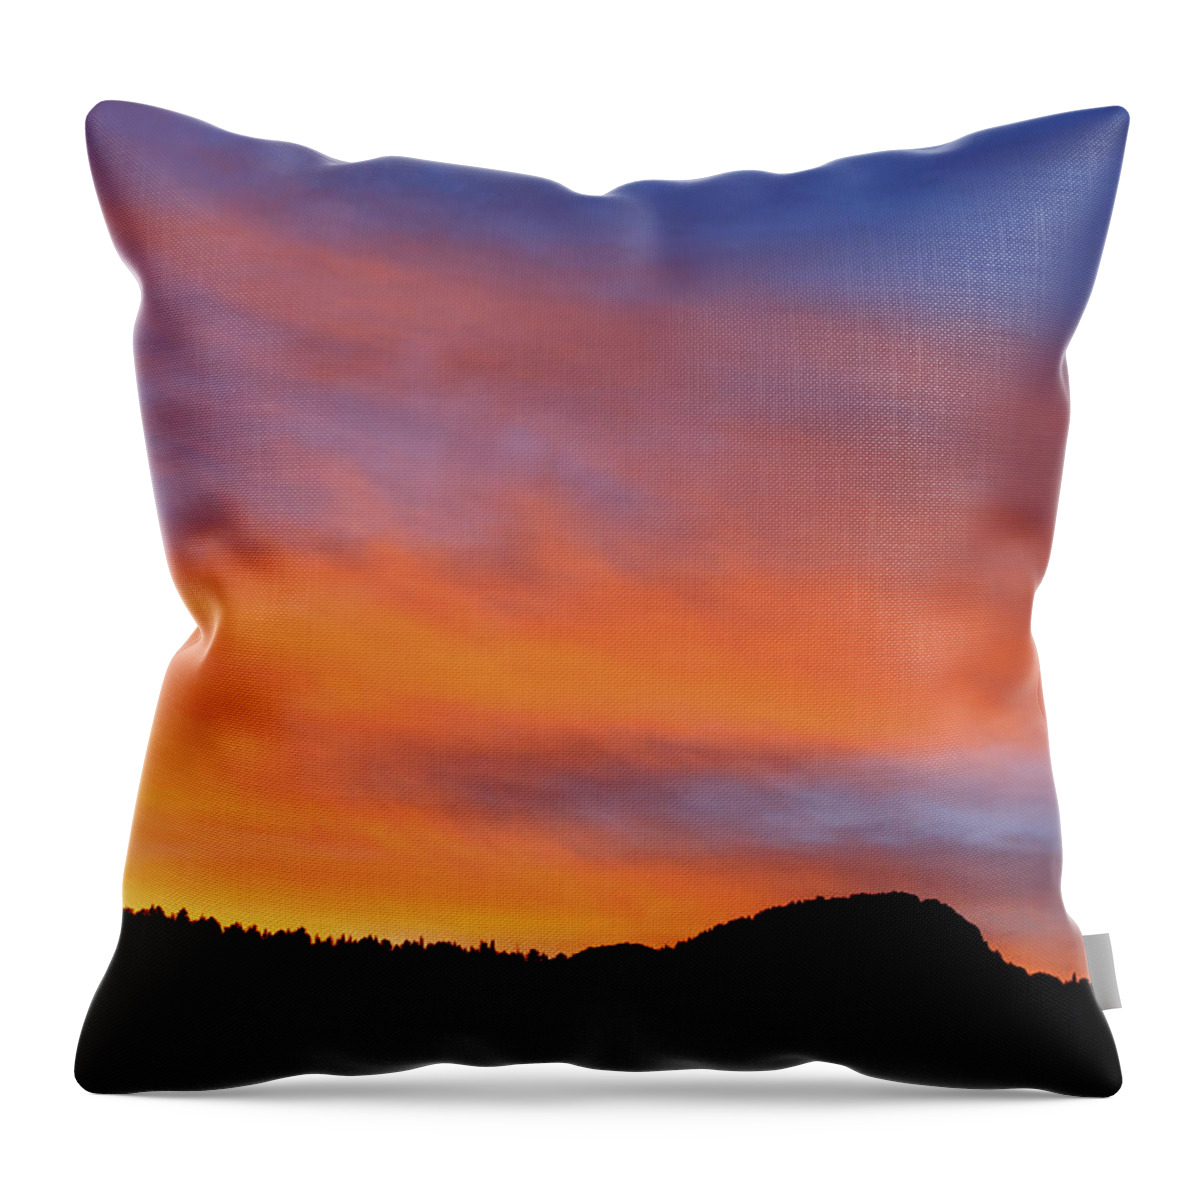 Colorado Throw Pillow featuring the photograph Full Spectrum Sunrise by Kristin Davidson